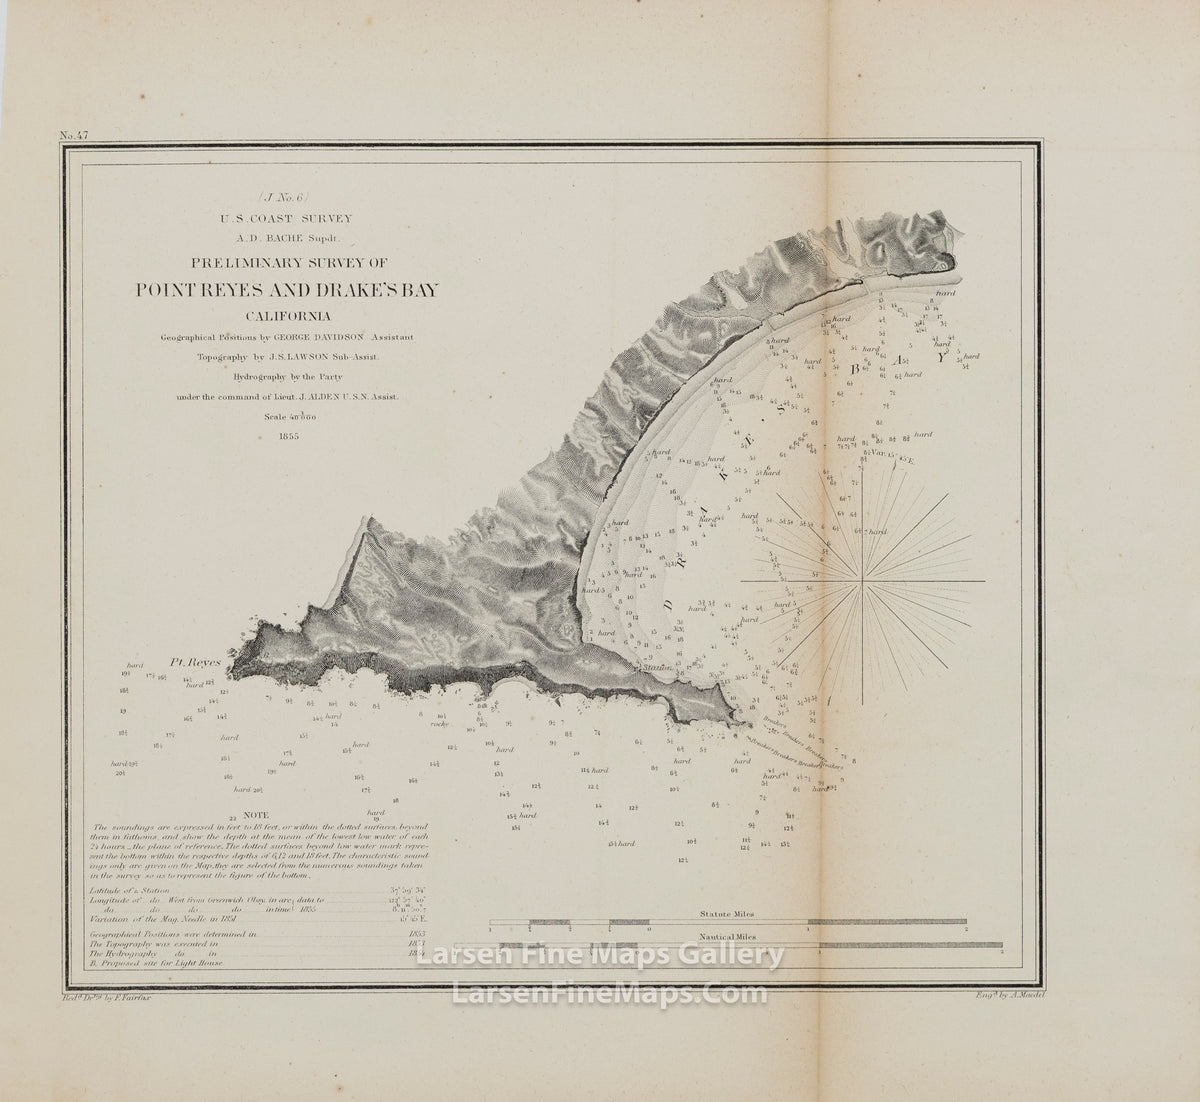 Preliminary Survey of Point Reyes and Drake's Bay California